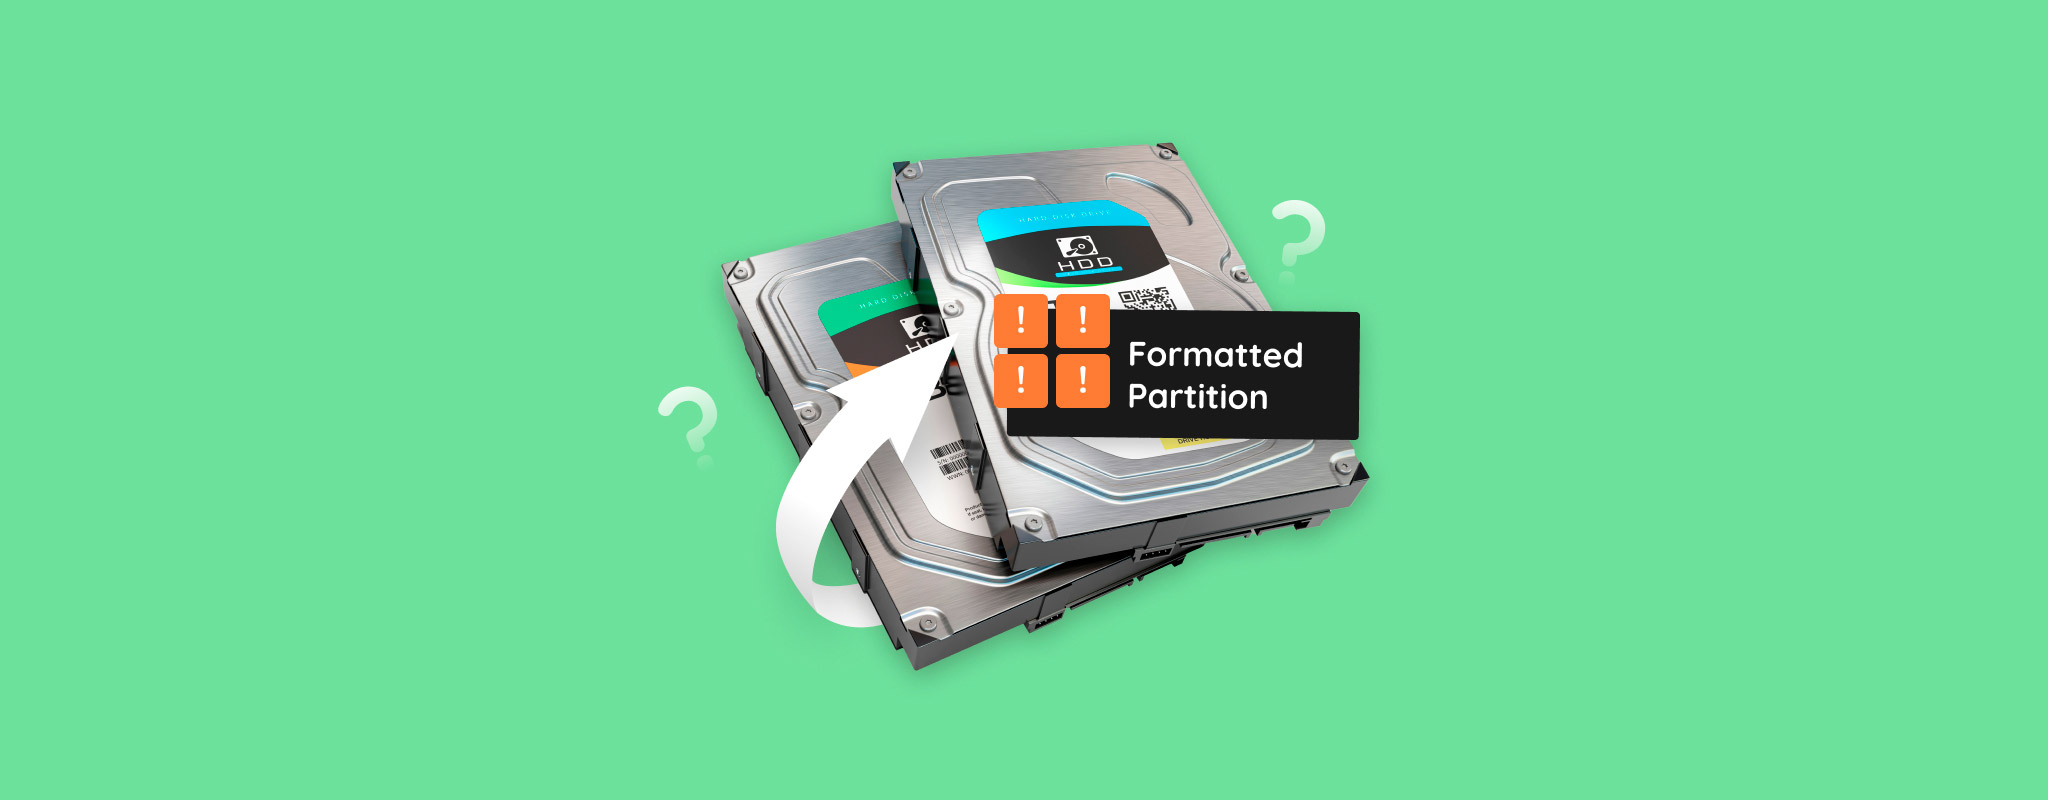 recover formatted partition